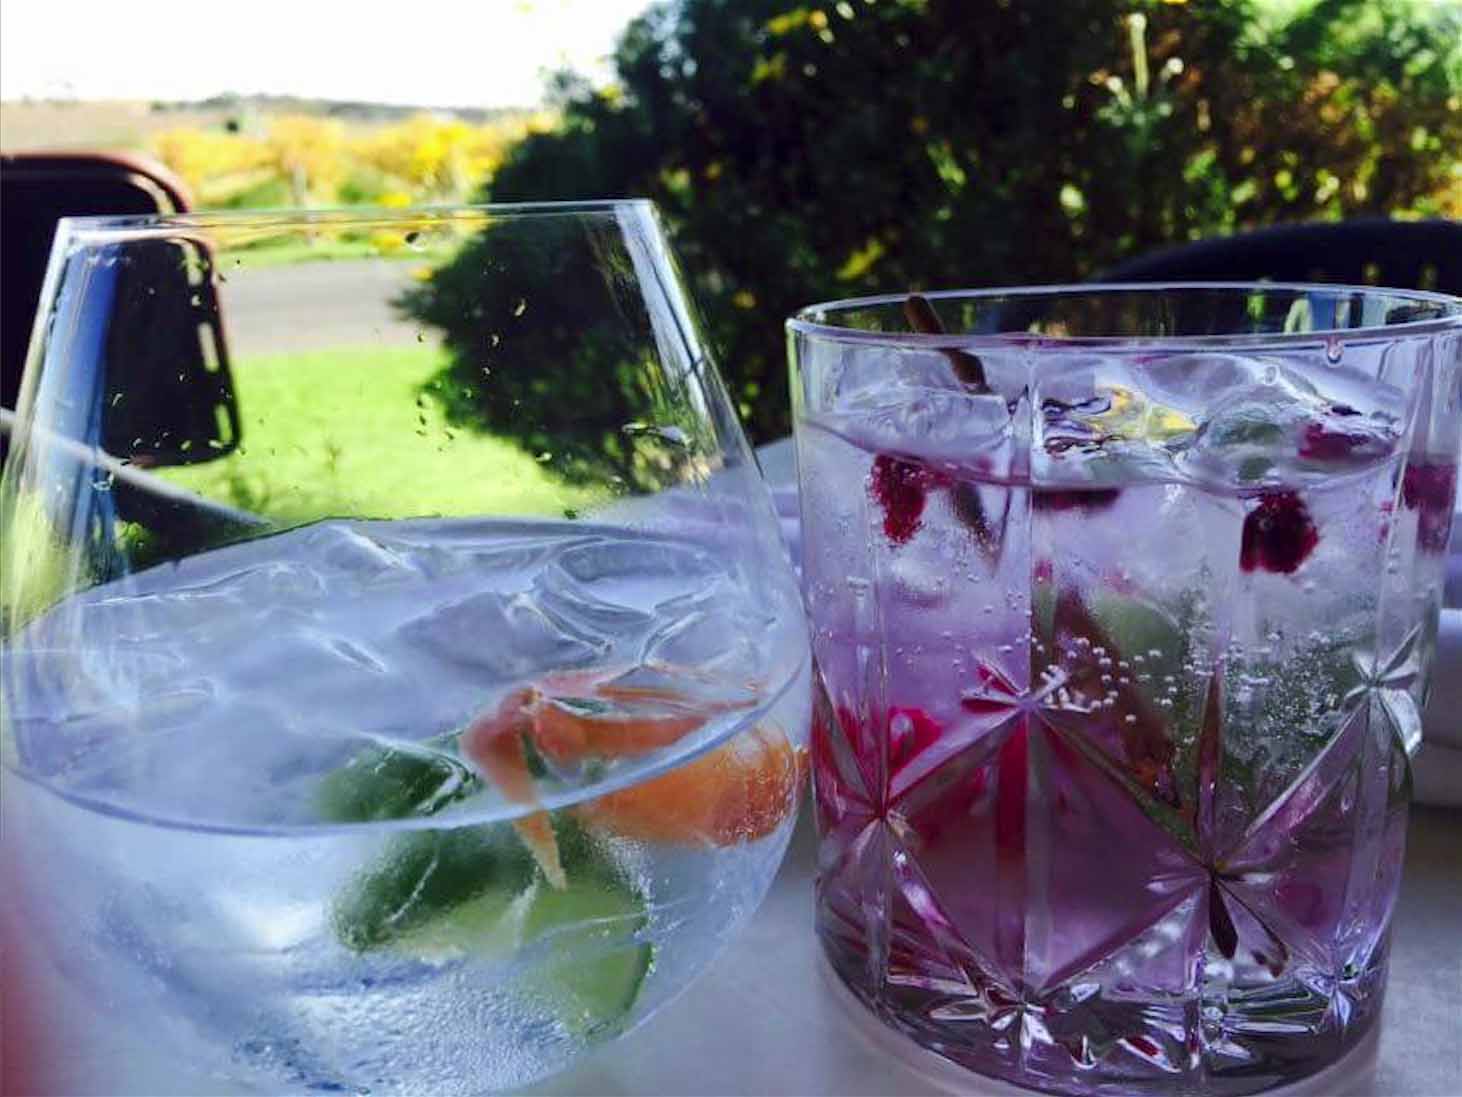 Exports of gin saw a 550% spike in value to nearly €1 million in the first three months of 2018.